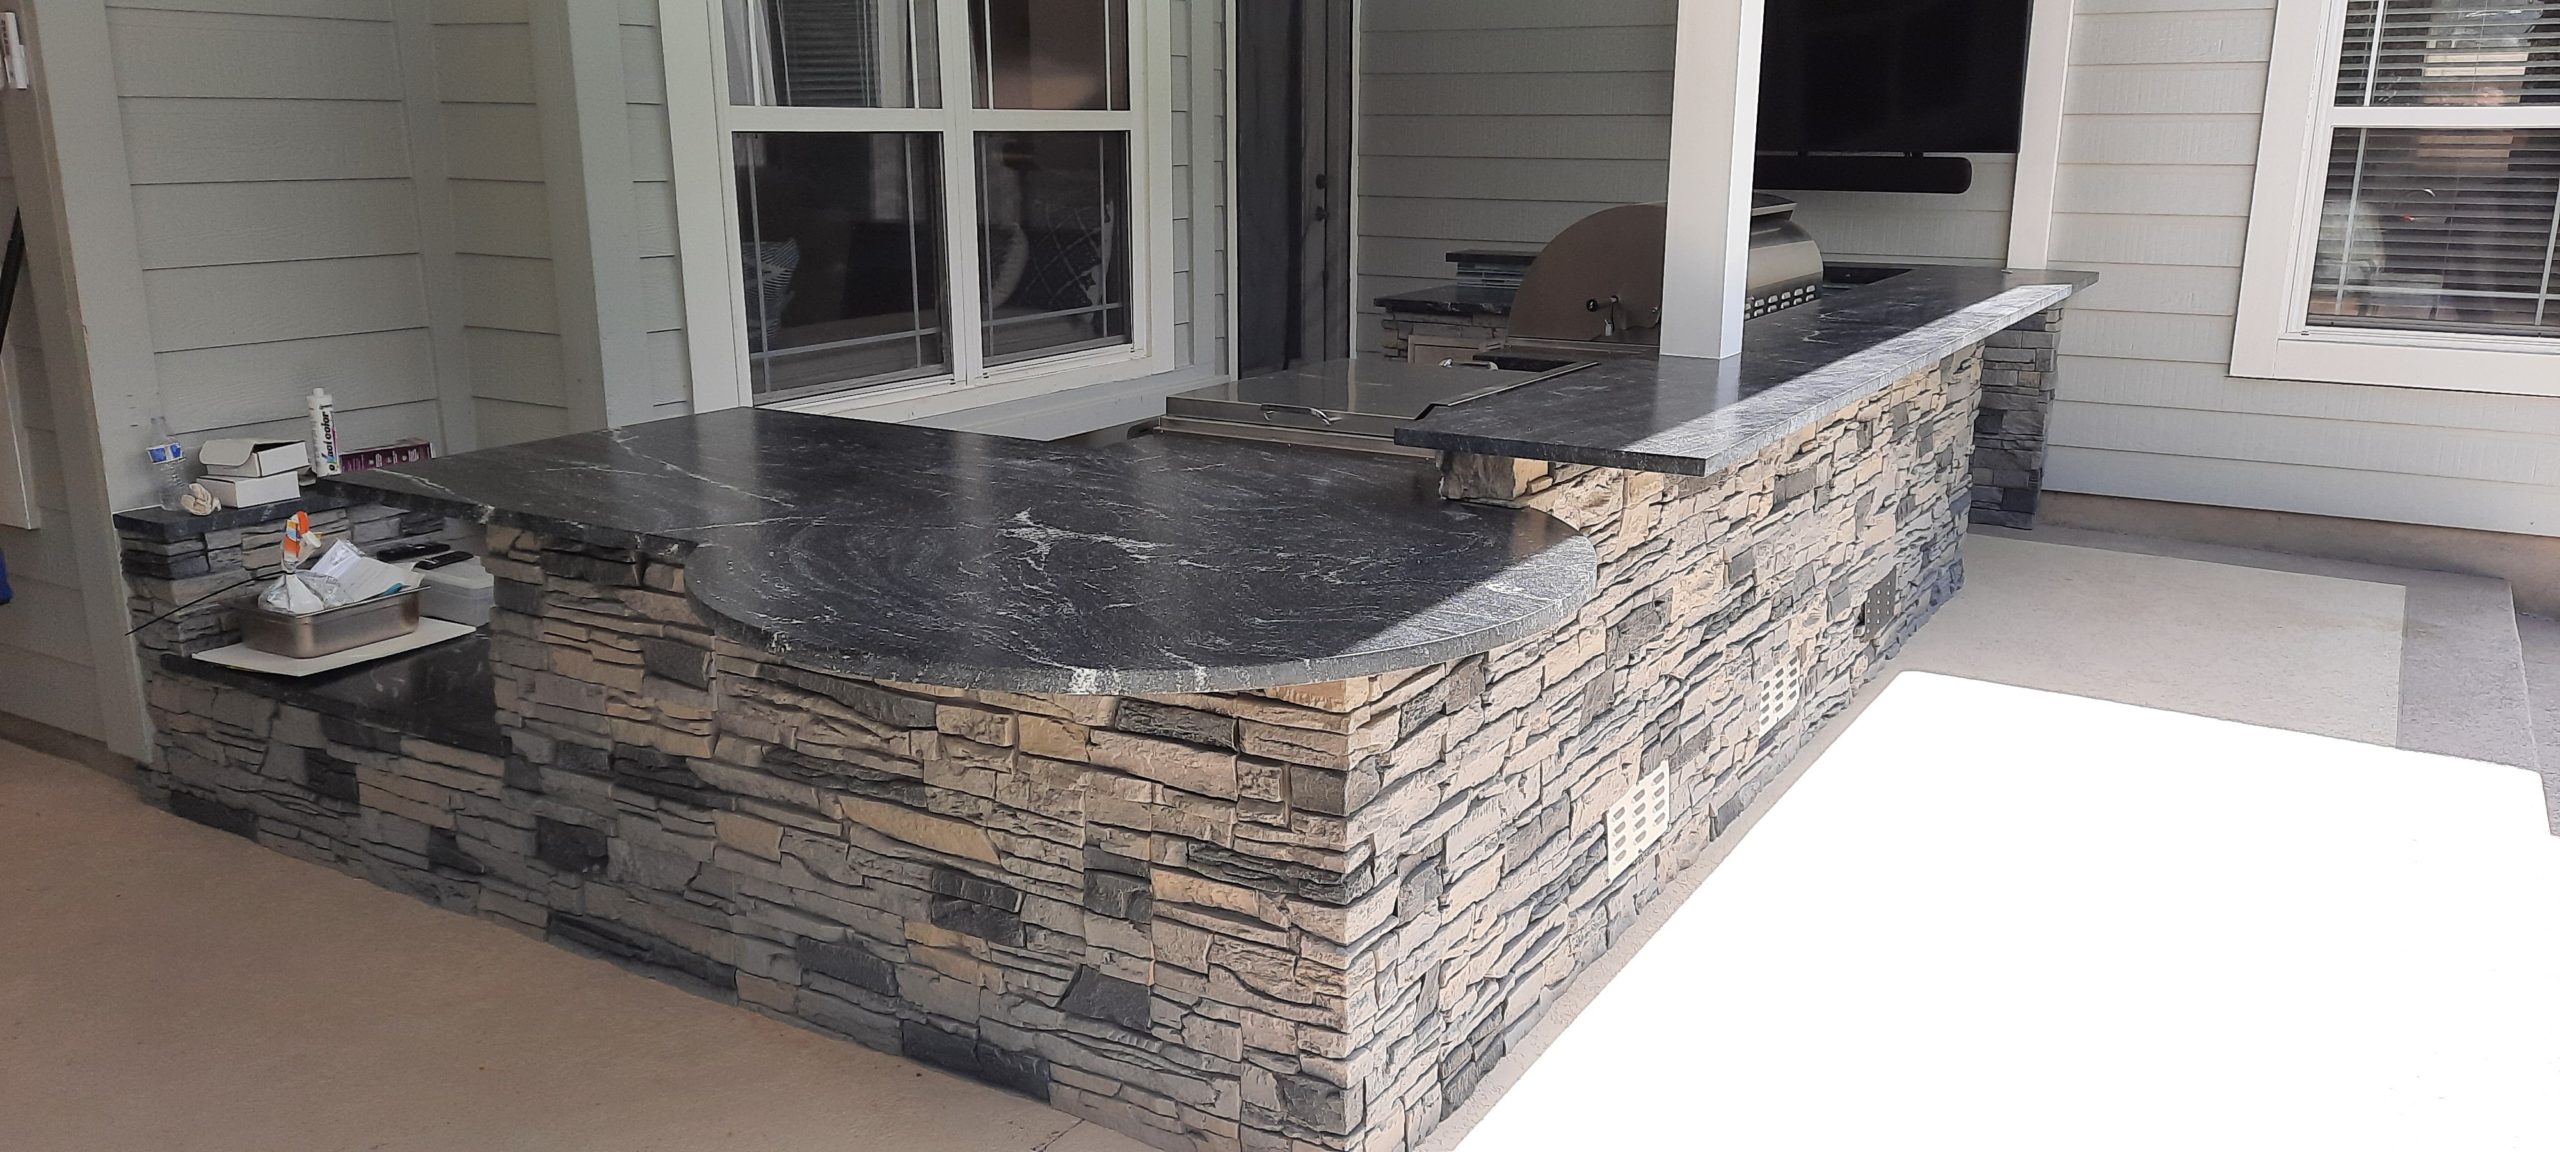 Northern Slate faux stone DIY outdoor kitchen